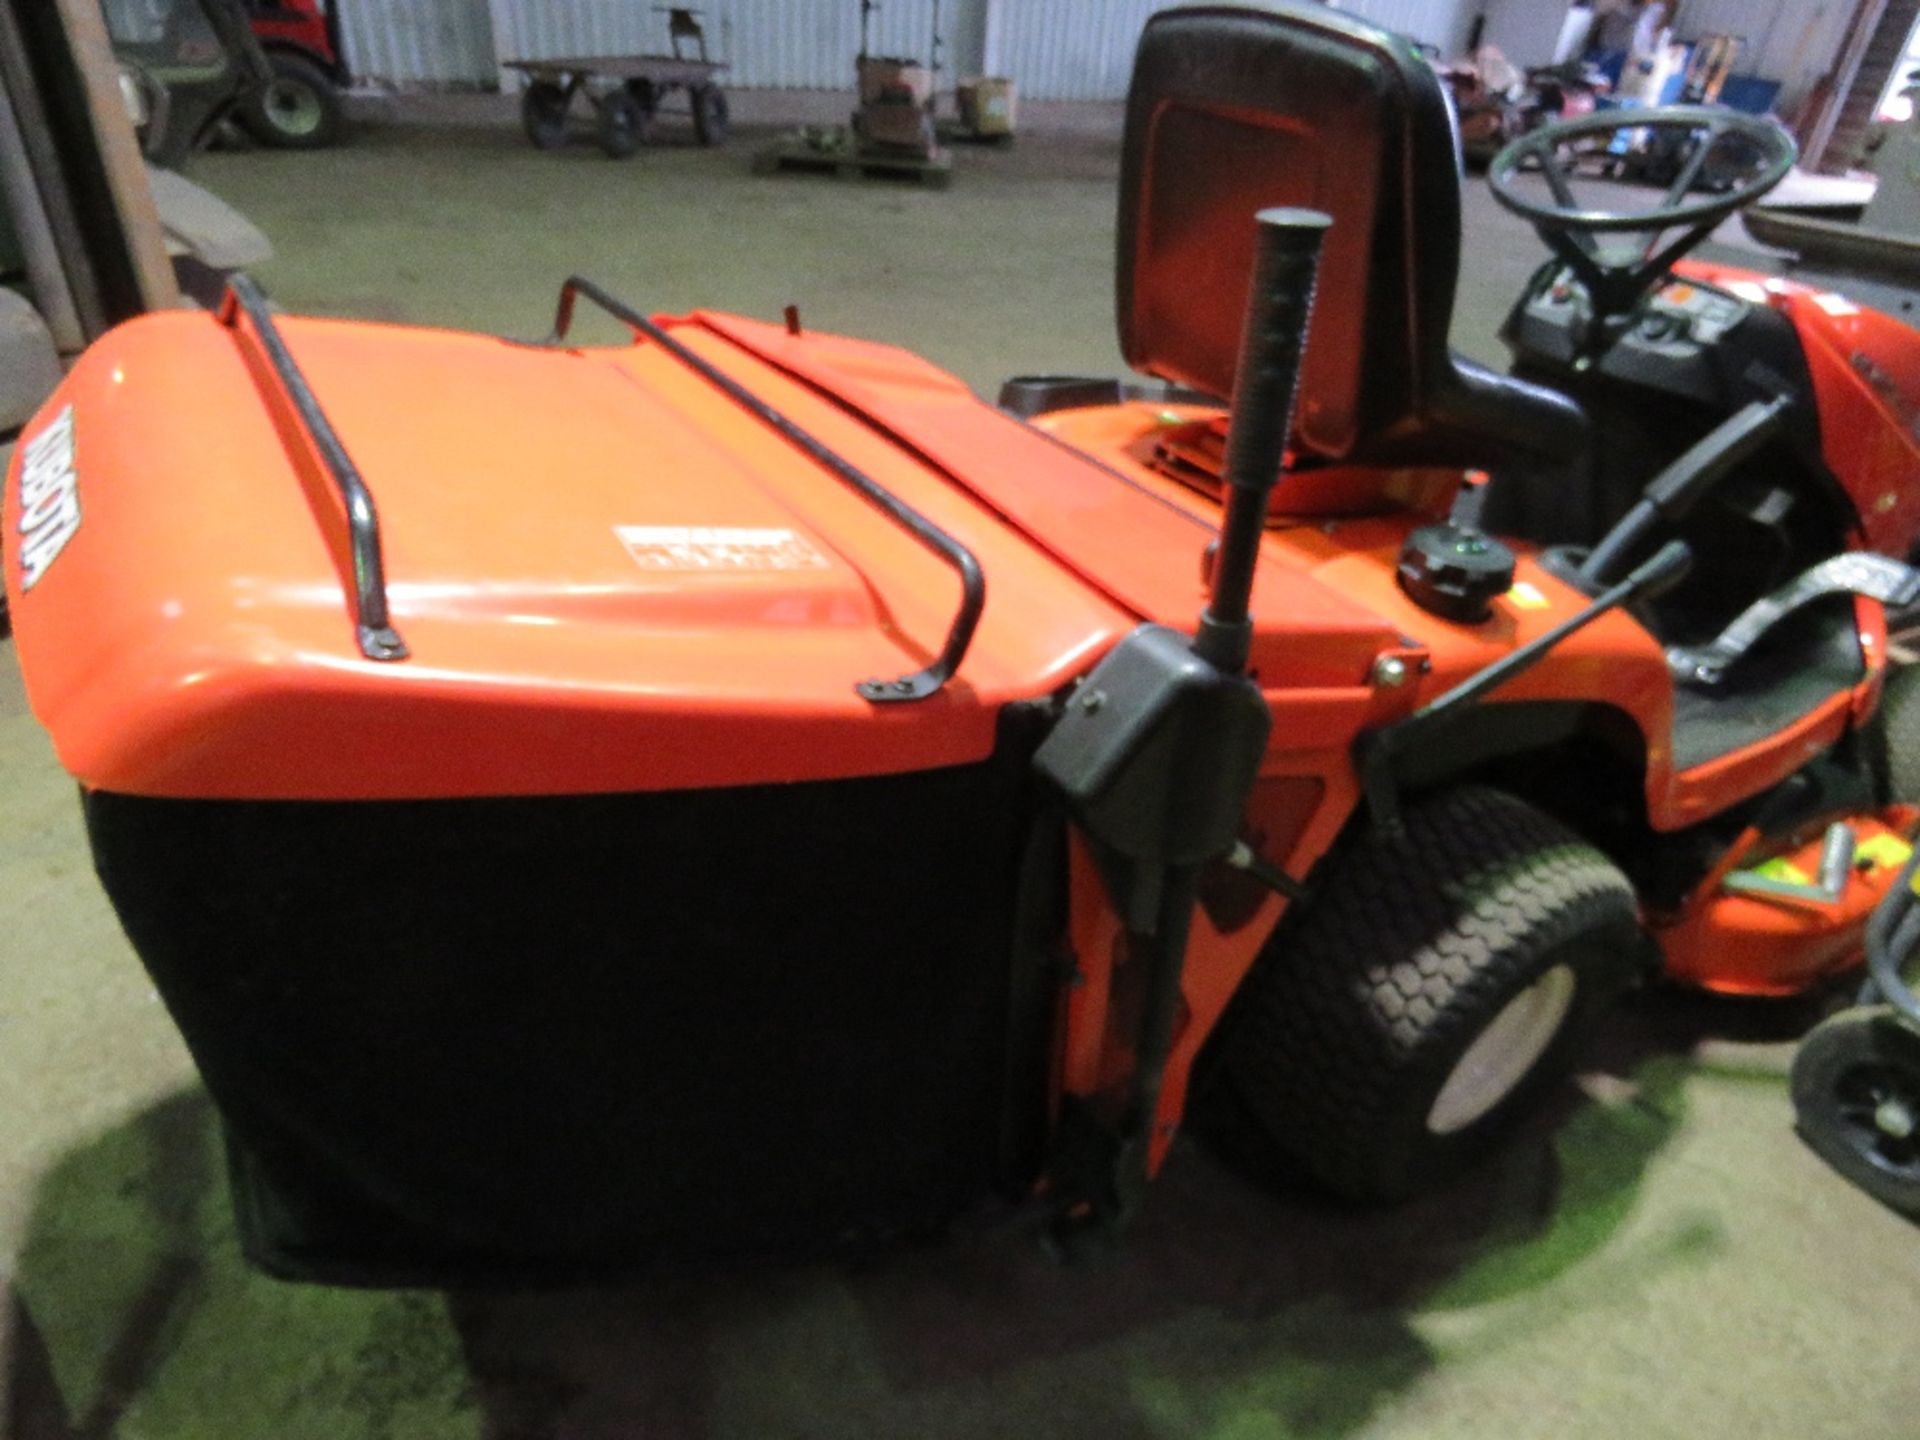 KUBOTA GR1600-II DIESEL RIDE ON MOWER WITH REAR COLLECTOR PLUS DISCHARGE CHUTE. SN:30142. WHEN TESTE - Image 7 of 14